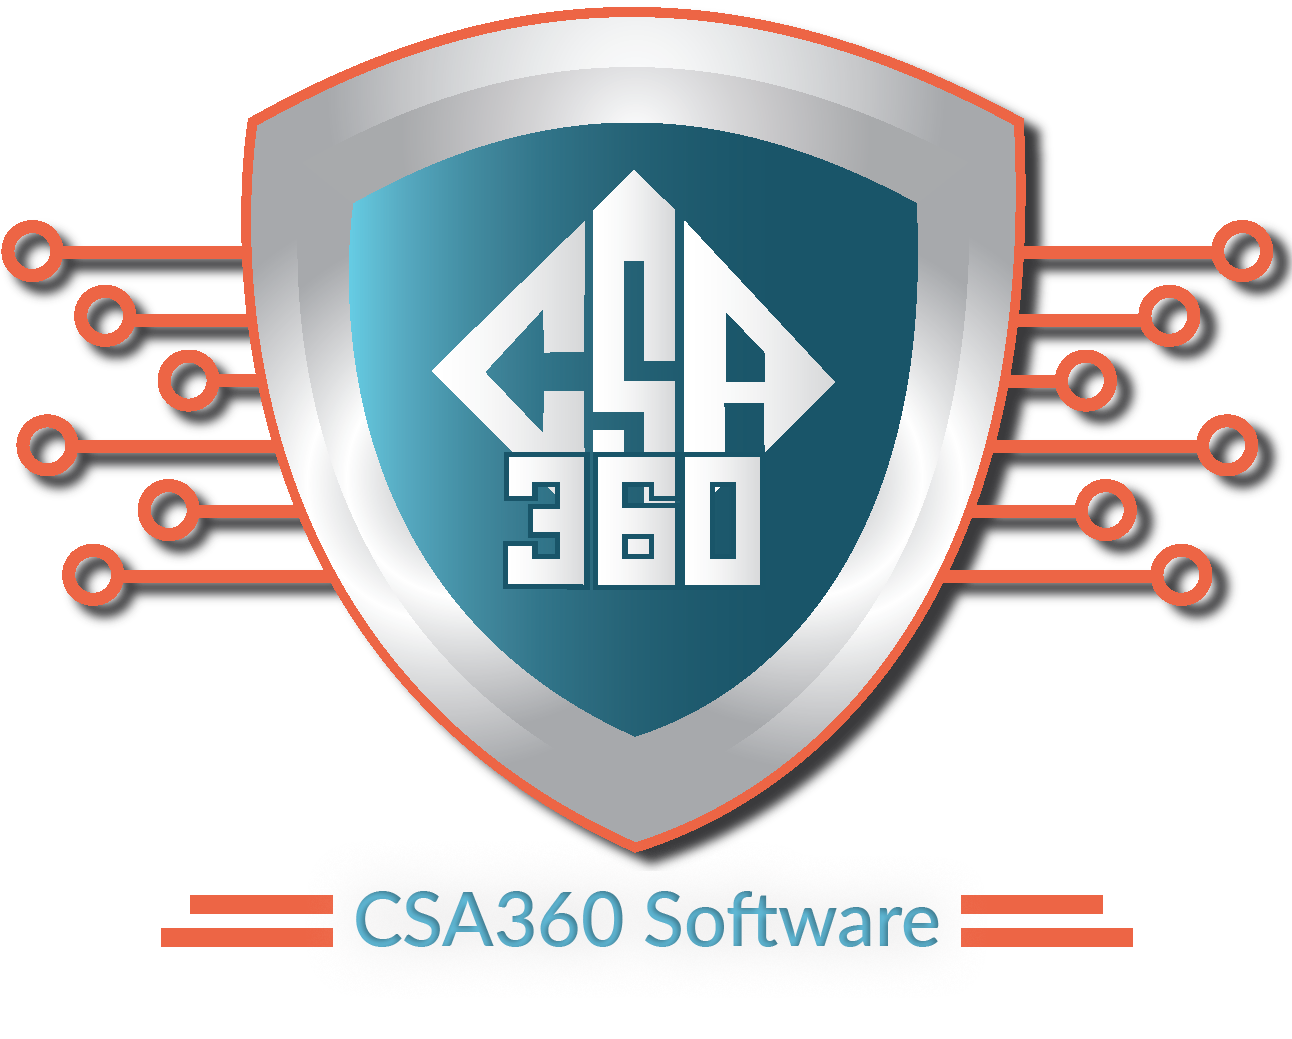 7 Special Services Offered by CSA360 Software To Improve Your All-In-One Platform